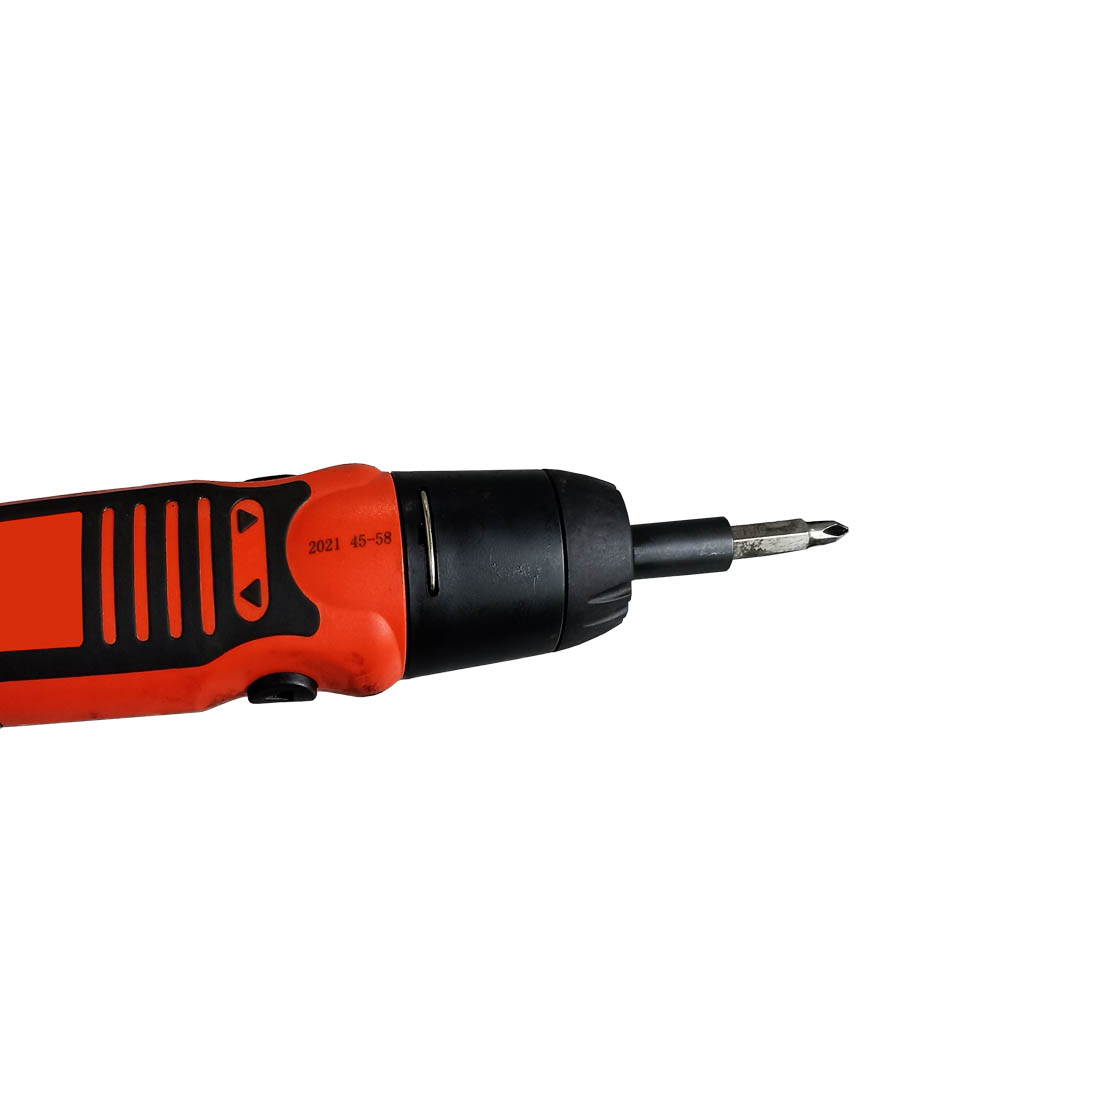 battery powered screw driver preview image.